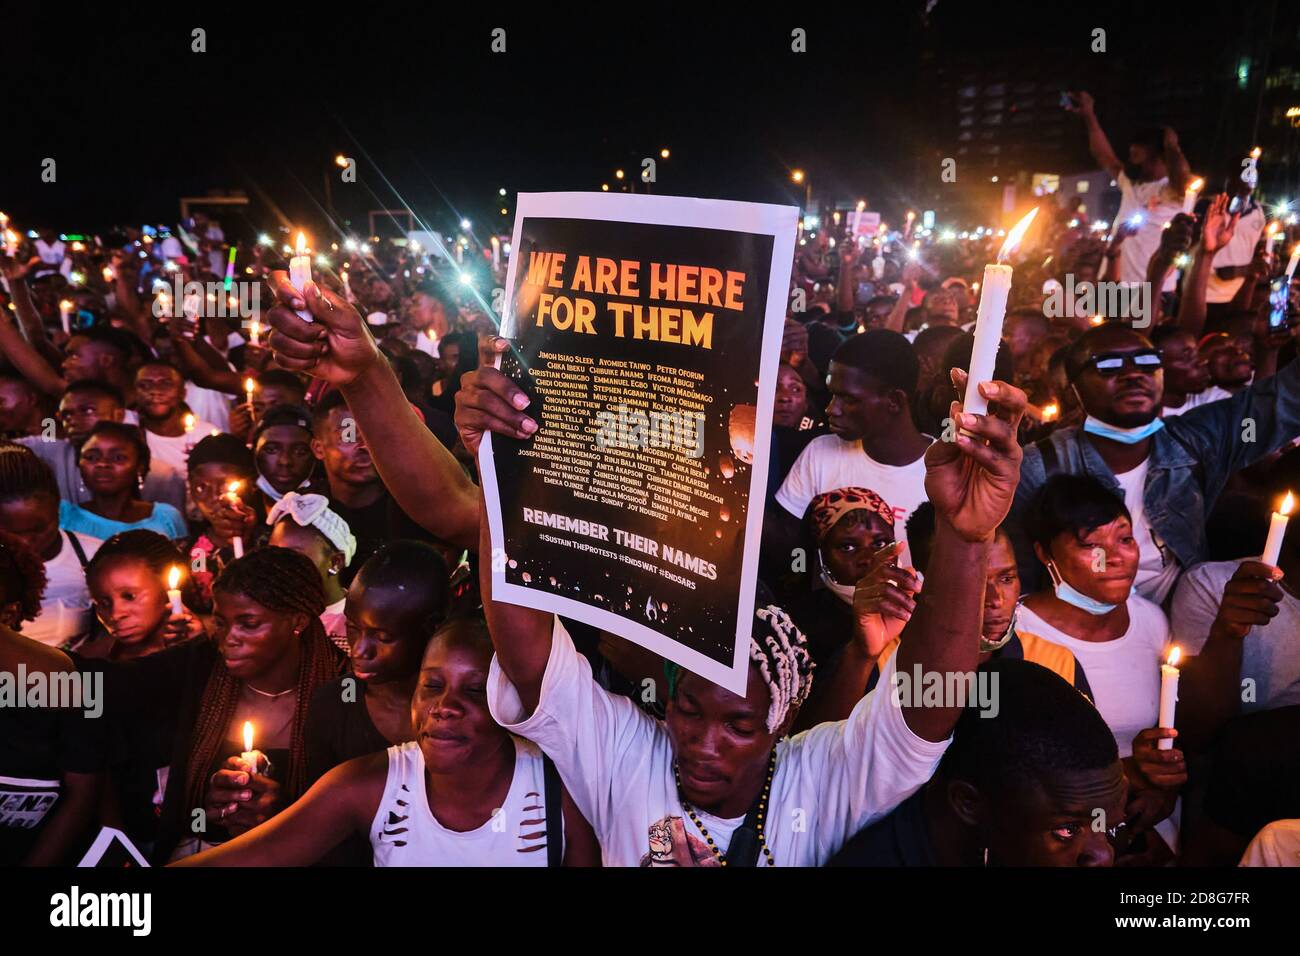 Protesters hold candlelight for victims of police brutality during protests tagged #EndSARS at the Lekki tollgate in Lagos Nigeria on October 16, 2020 Stock Photo